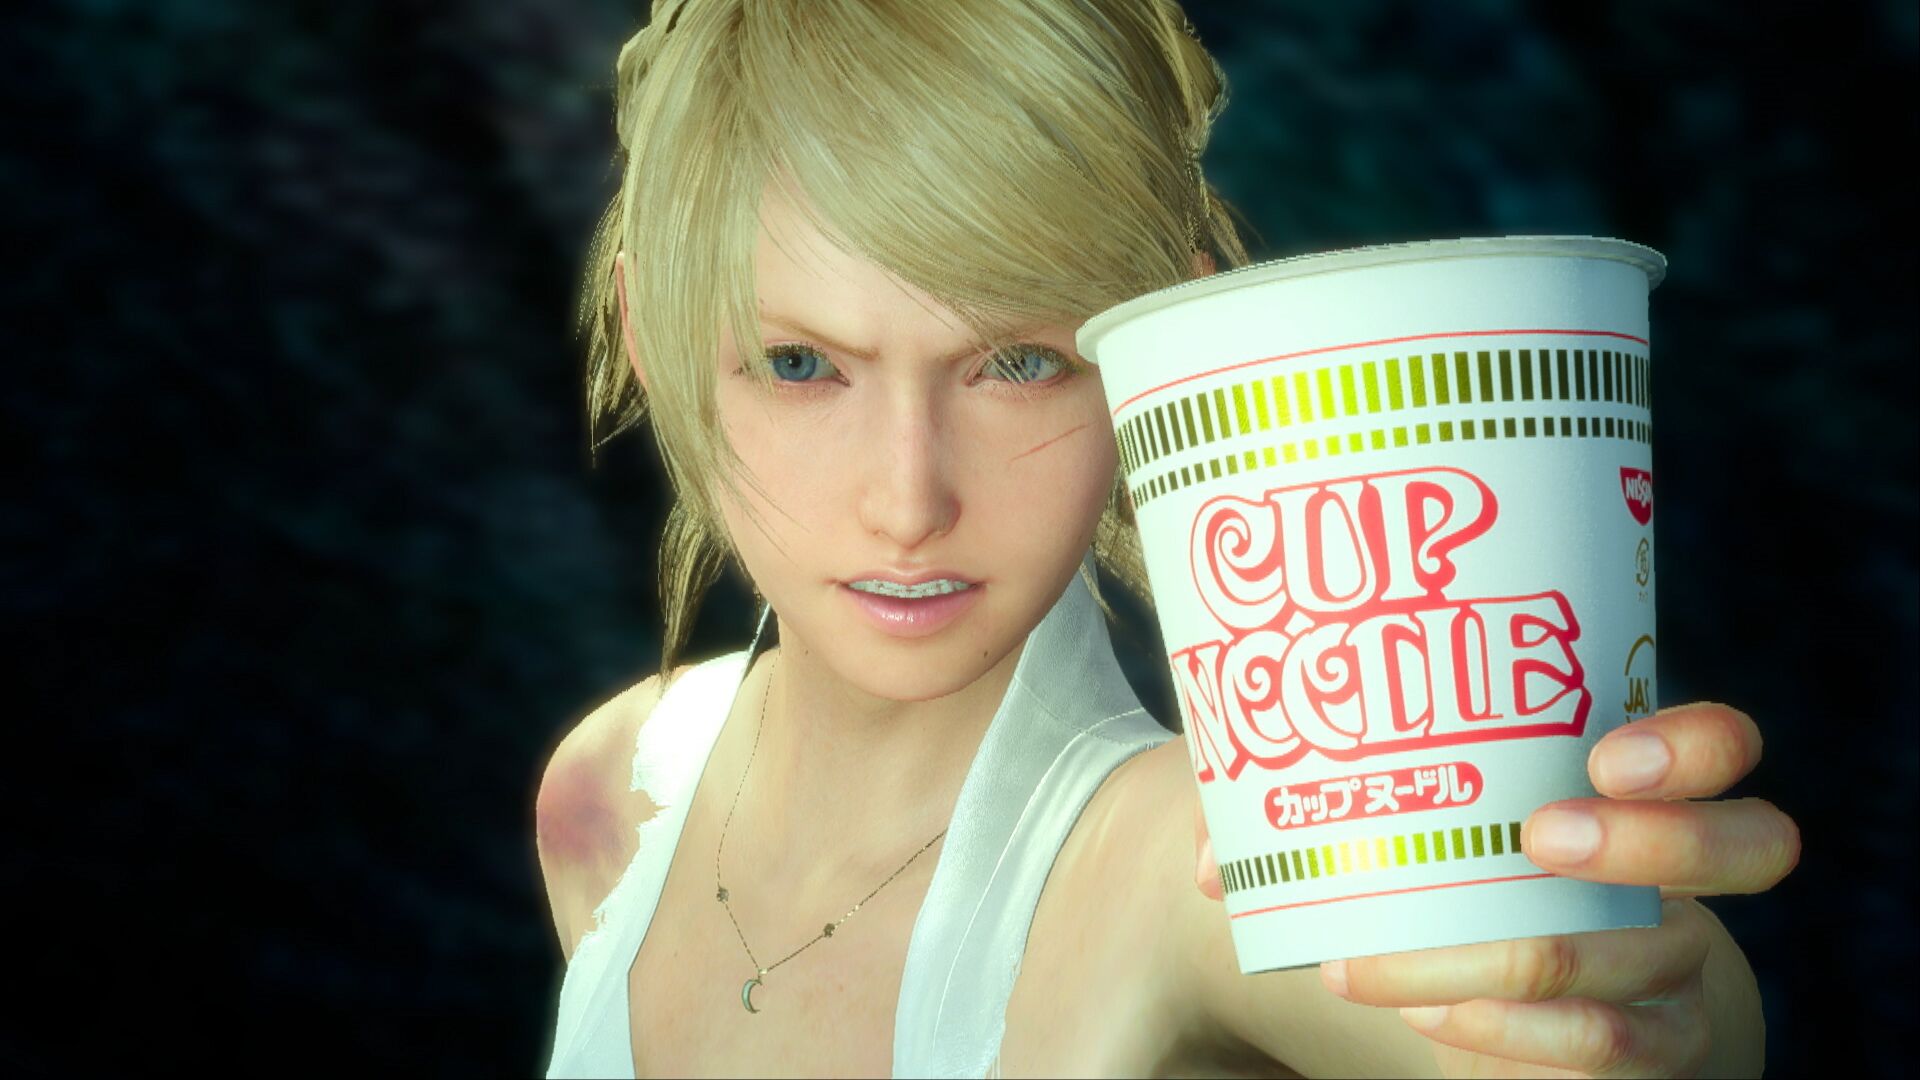 Nissin joins up with Final Fantasy XV for awesome “Cup Noodle XV”  promotion【Video】